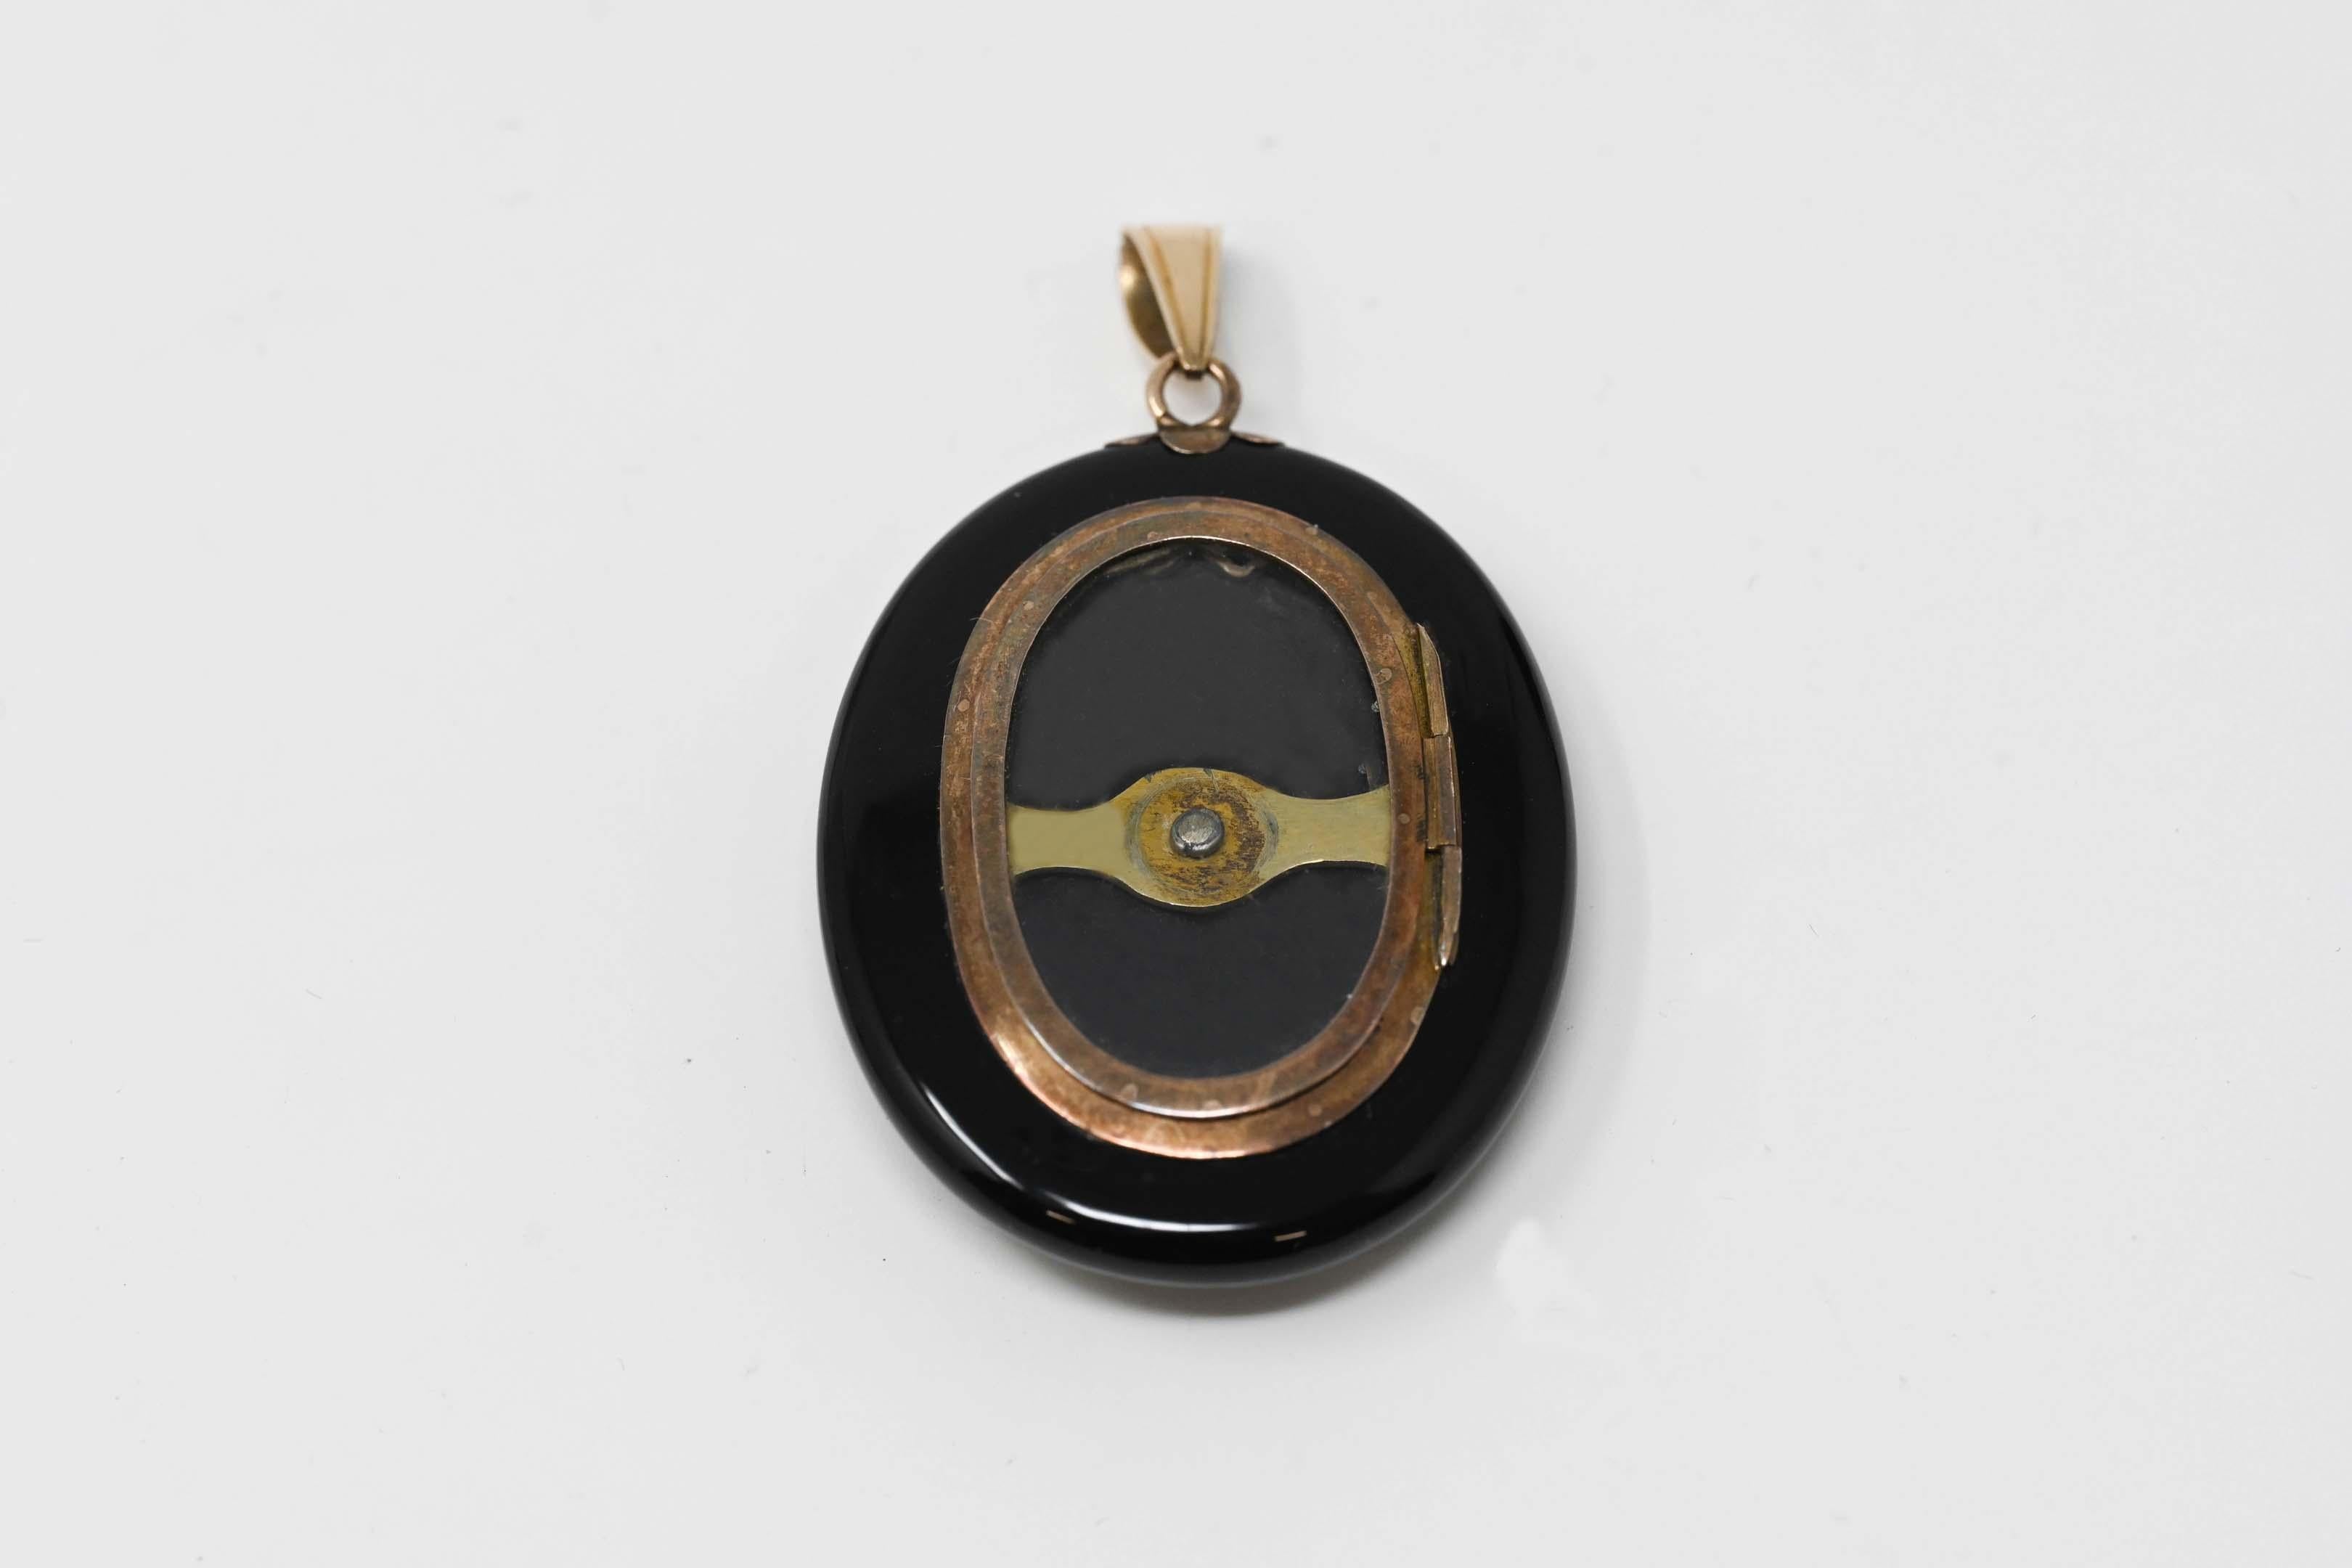 14k yellow gold and one piece onyx mourning locket pendant with 10 rosette cut diamonds on the back. Measures 2 inches x 1 5/8 inches without a loupe. In excellent condition.